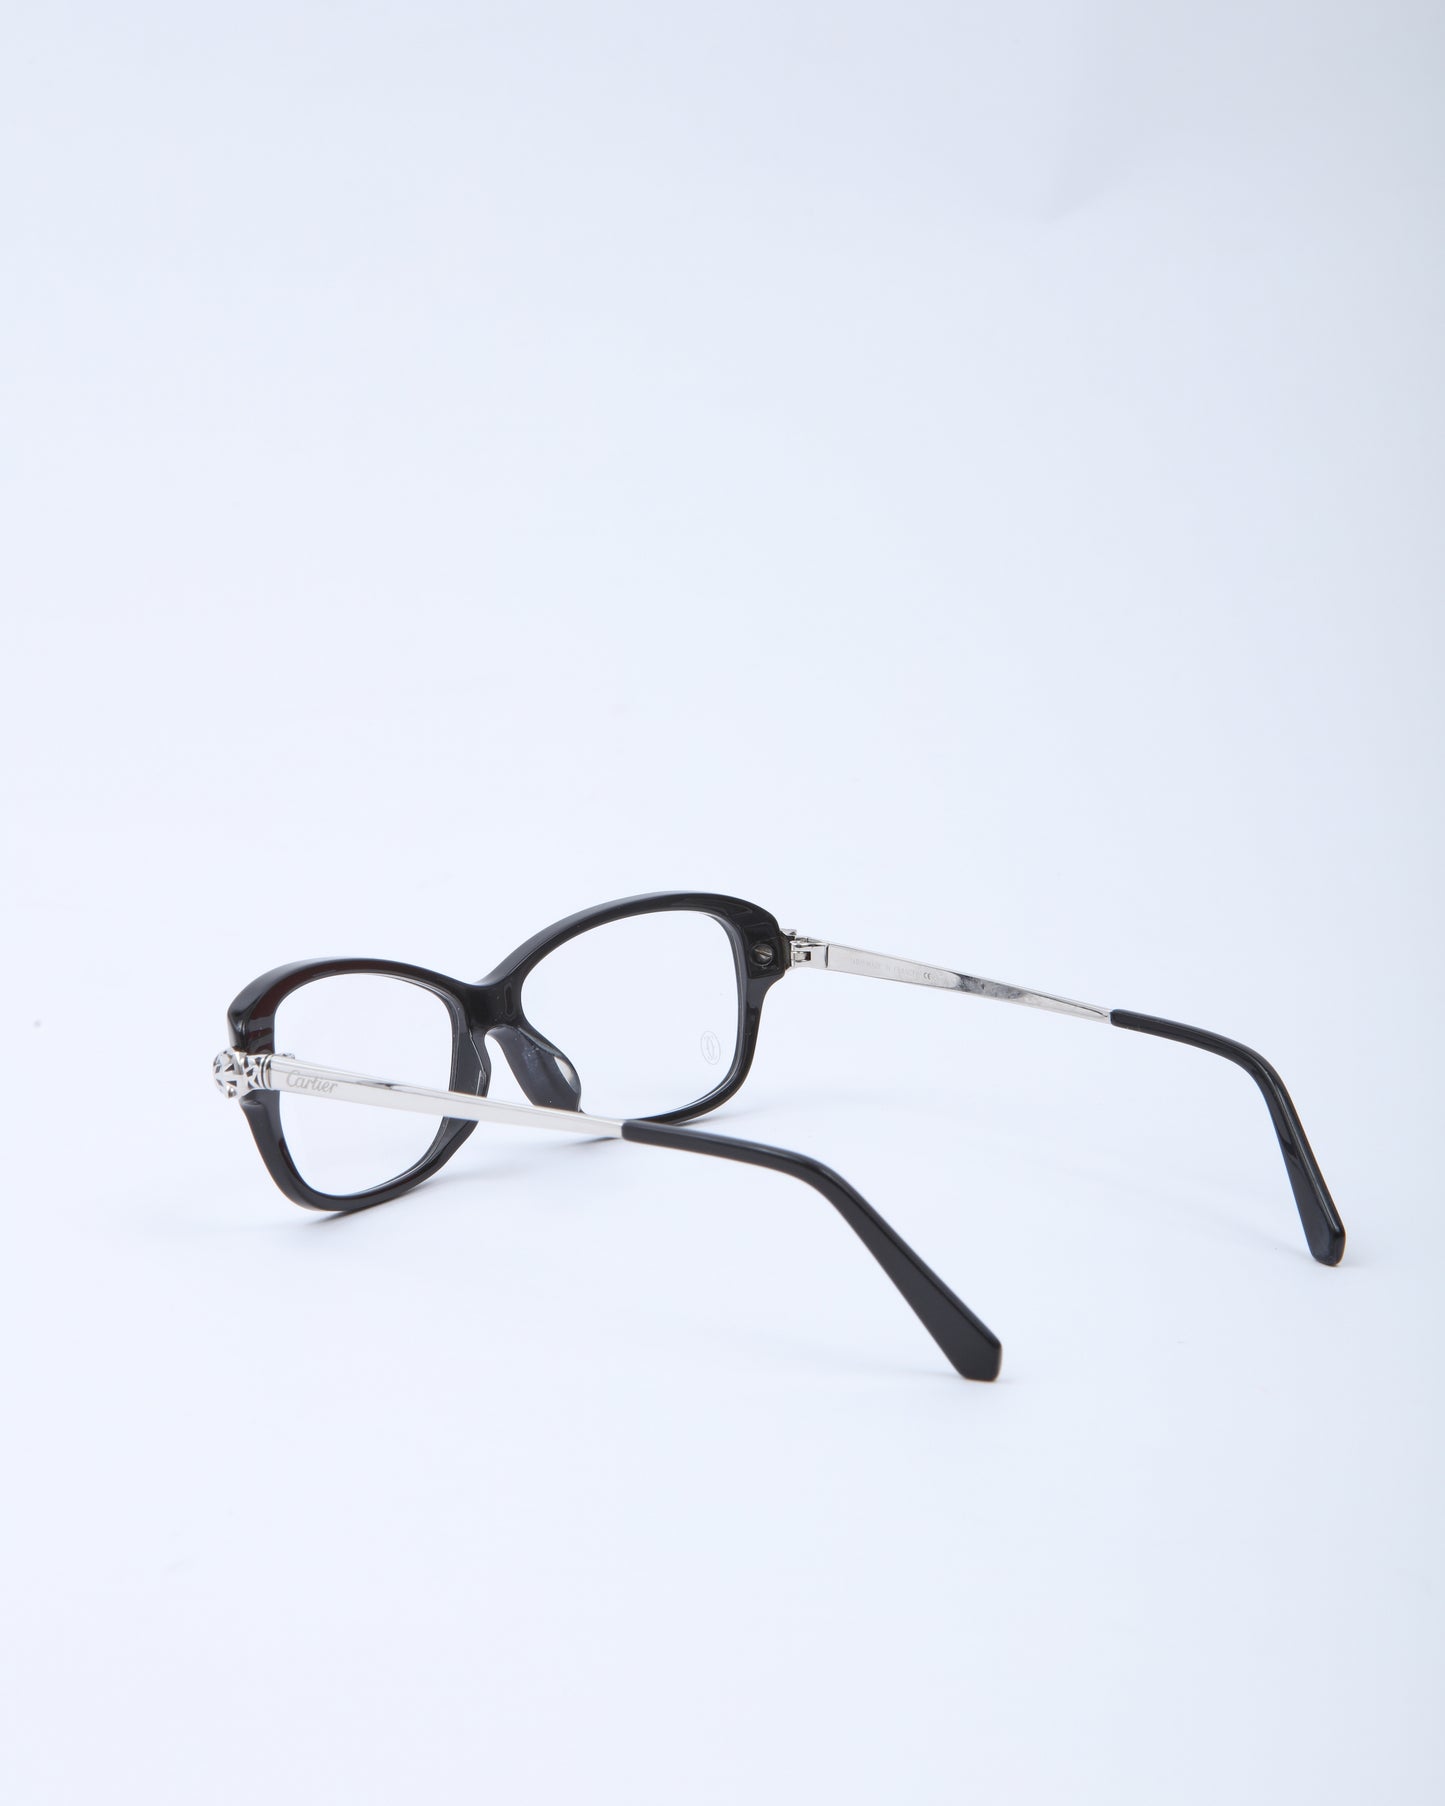 Cartier Black/Silver Panthere CT0067OA Glasses